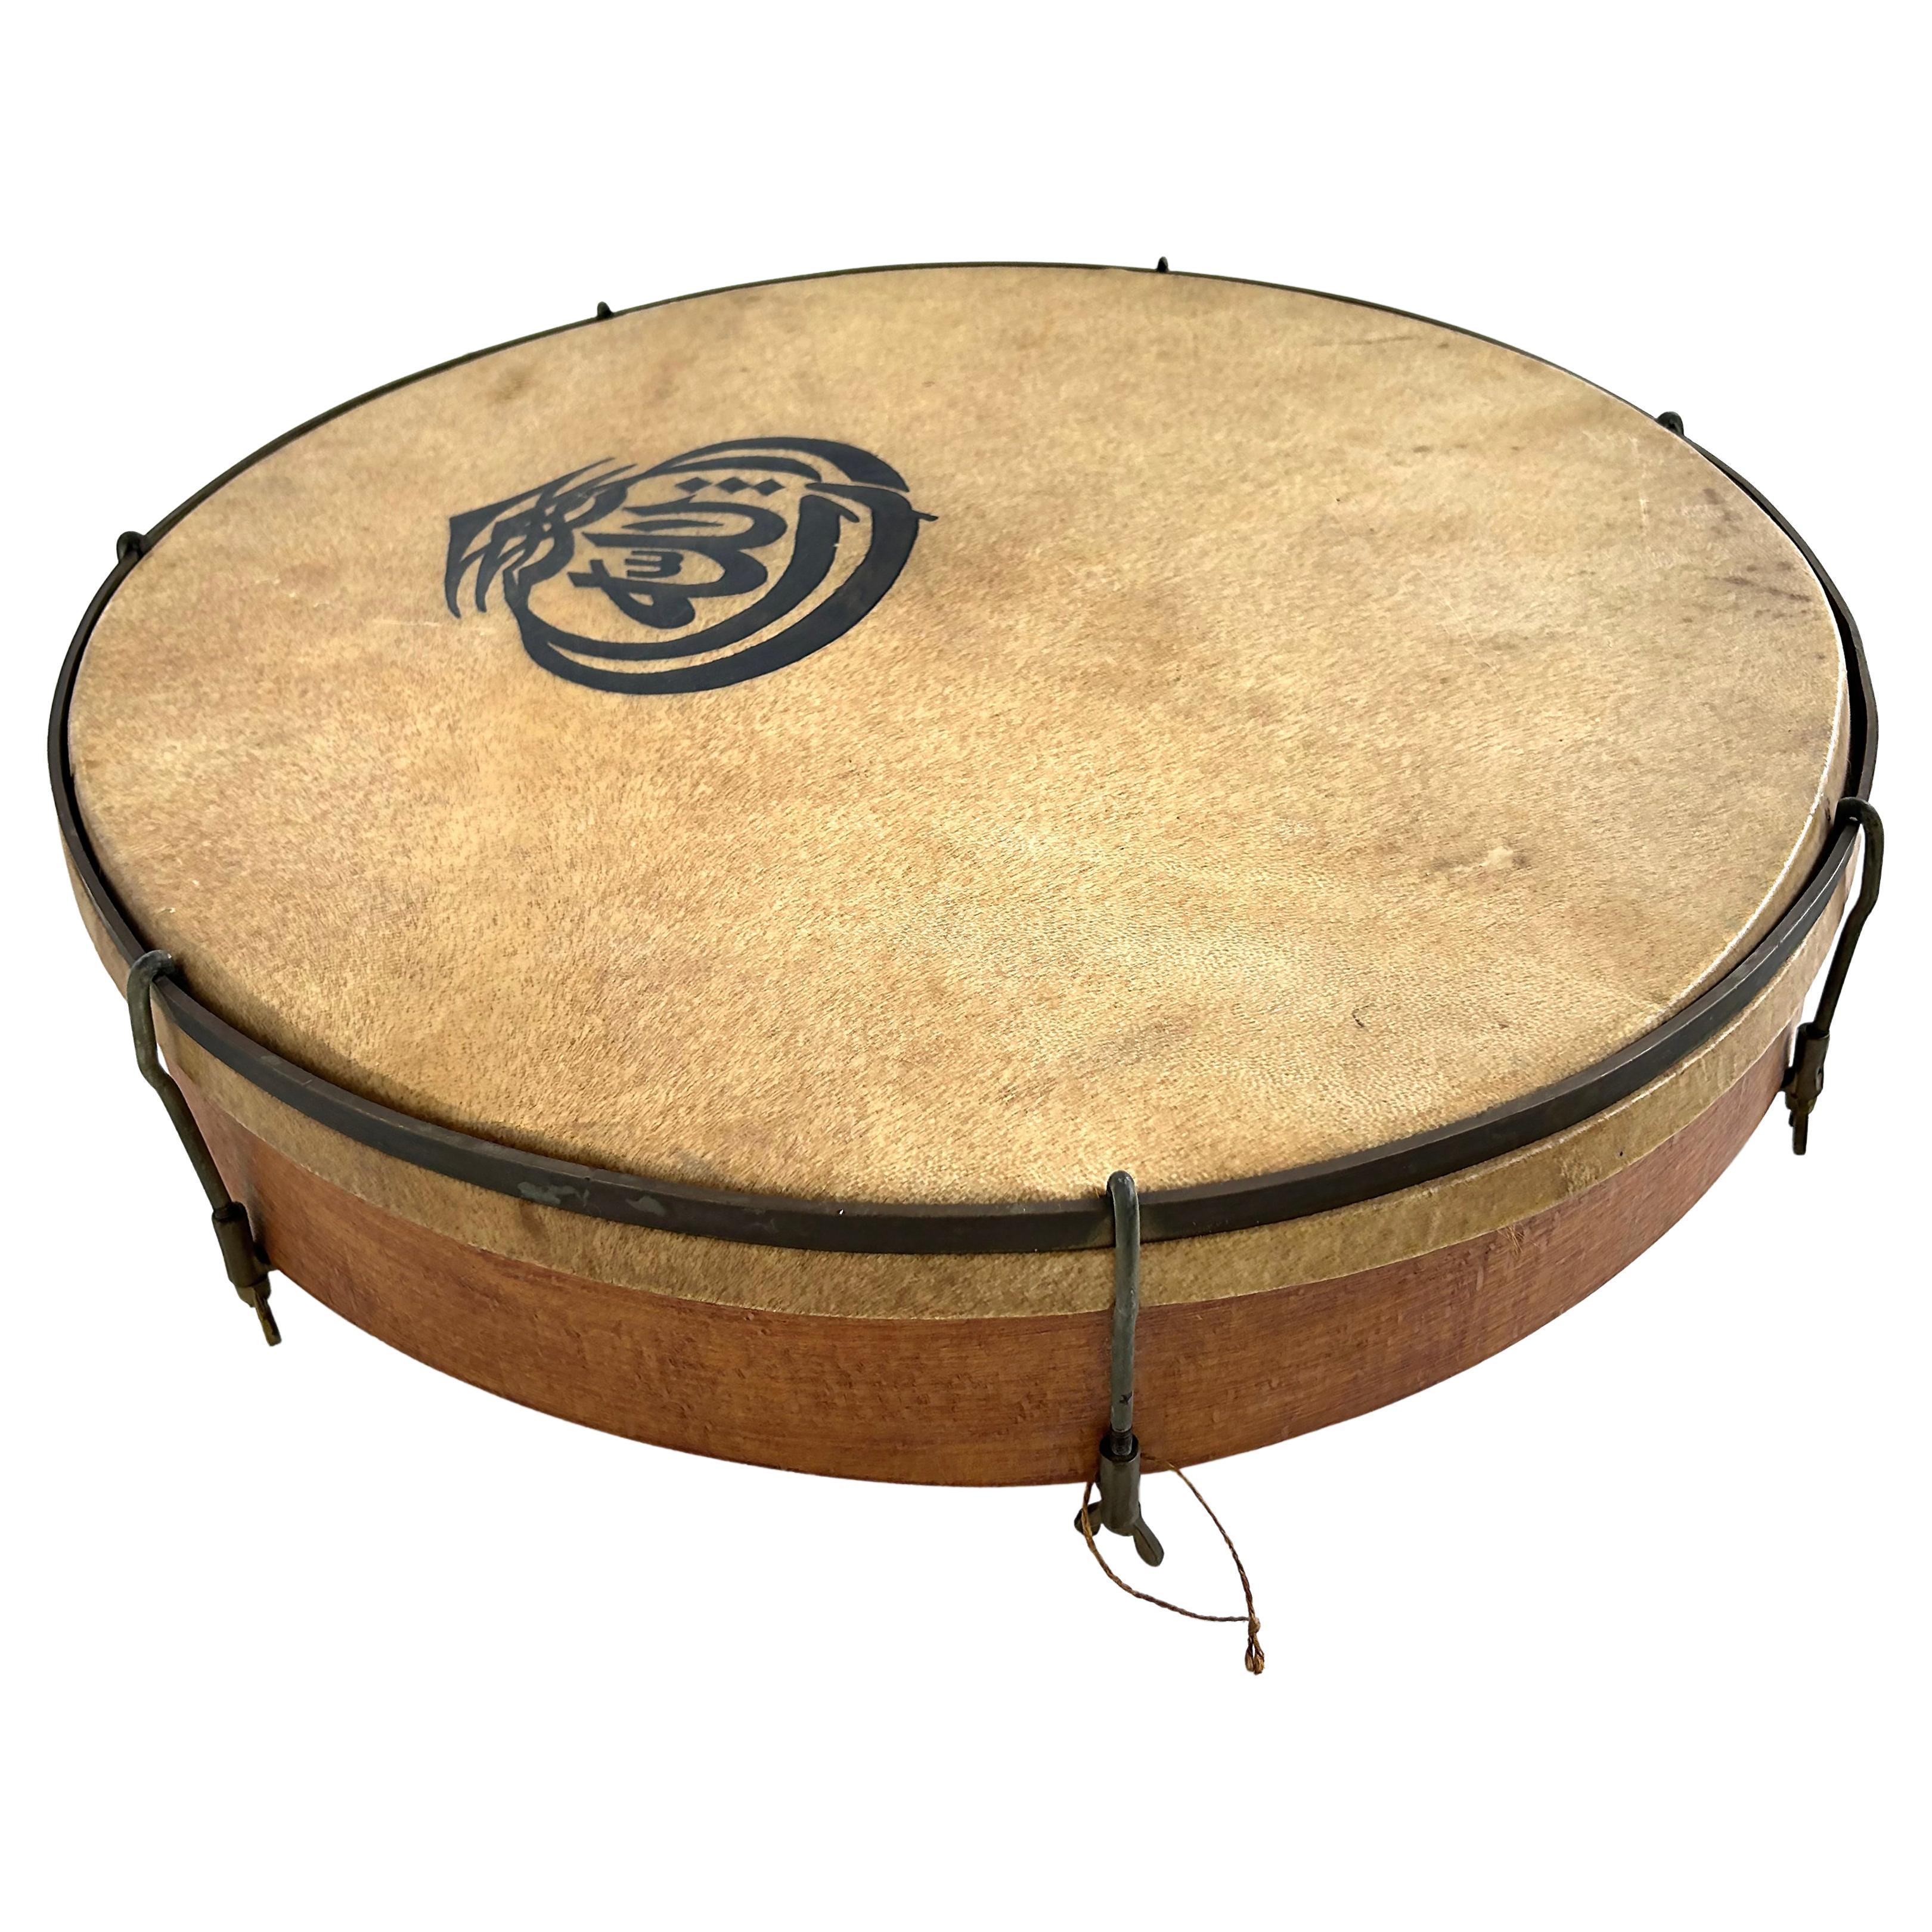 Hand-Made High-Quality Animal Skin Bentwood Drum with Ink Graphic Decoration For Sale